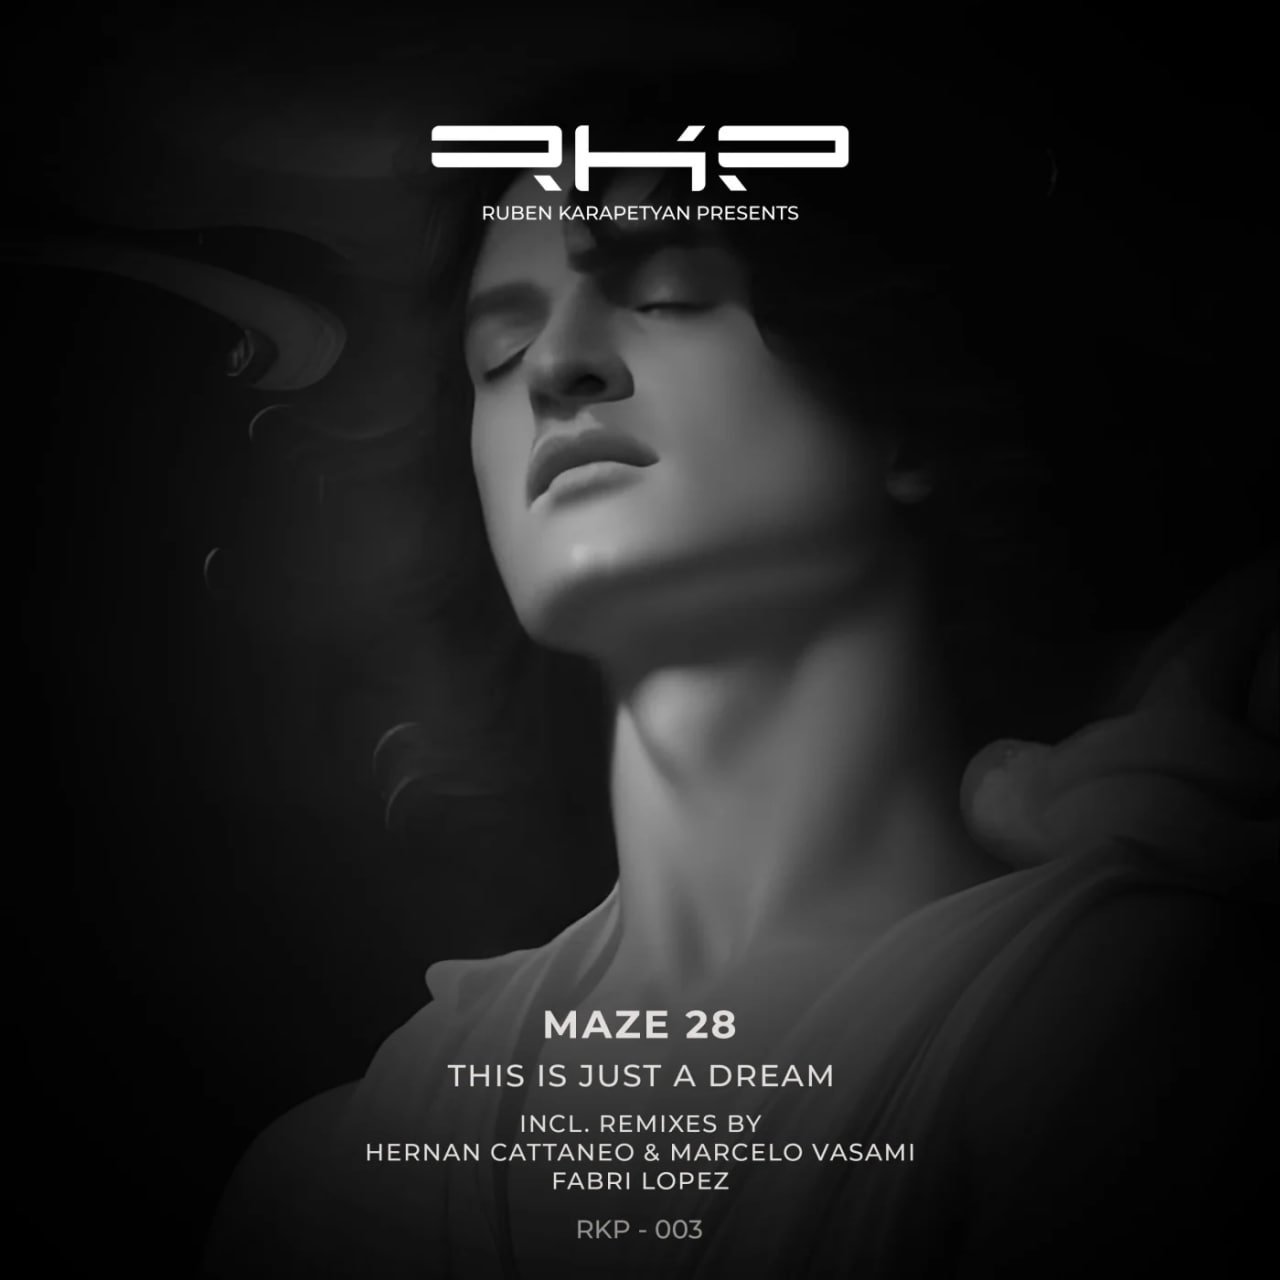 Maze 28 - This Is Just a Dream (Hernan Cattaneo & Marcelo Vasami Remix)